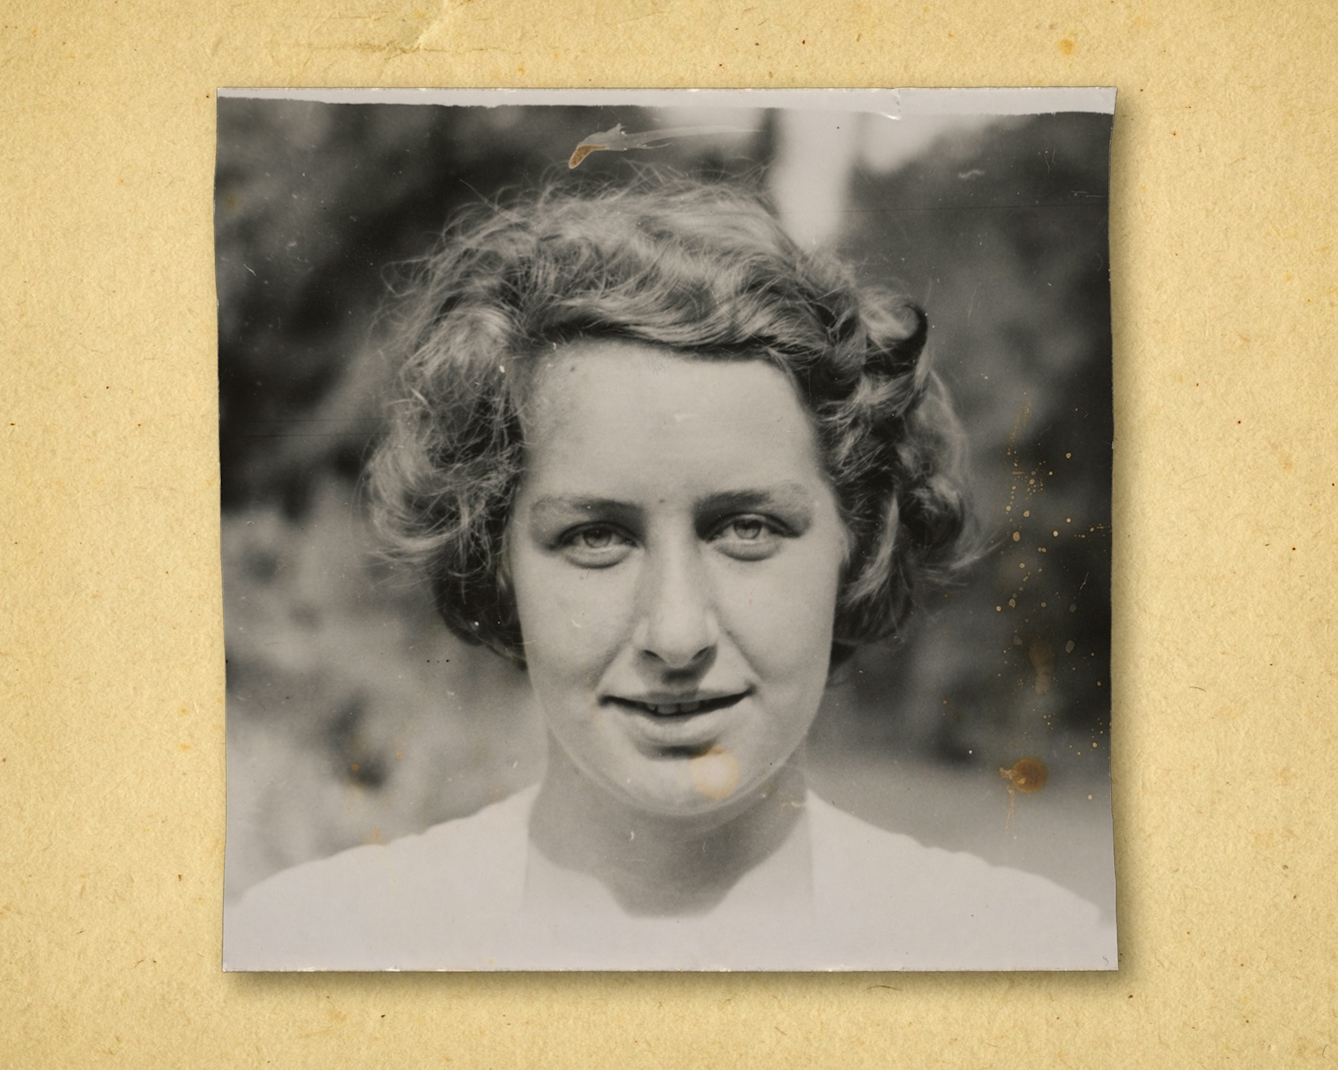 Photograph of a black and white photographic print, resting on a brown paper textured background. The print shows the head and shoulders of a woman outside in a garden. She is looking to camera, wearing a white shirt.